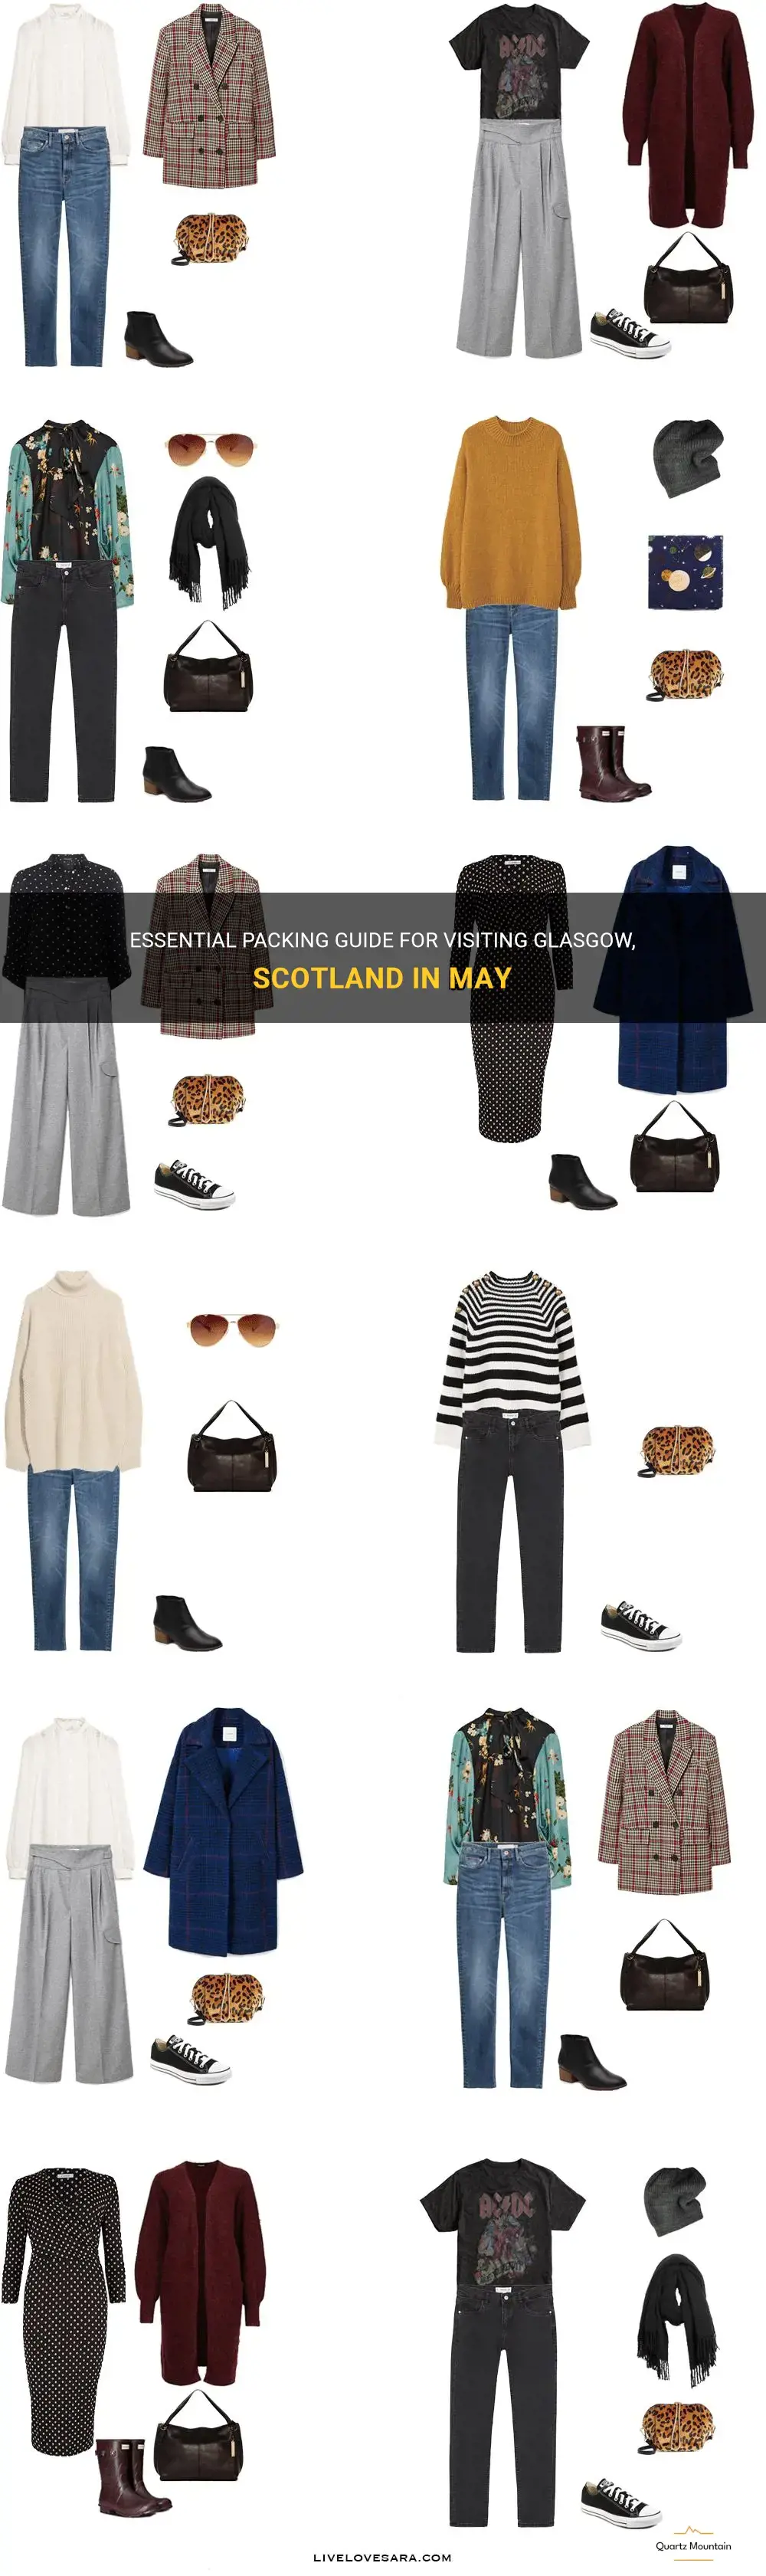 glascow scotland what to pack for the month of may